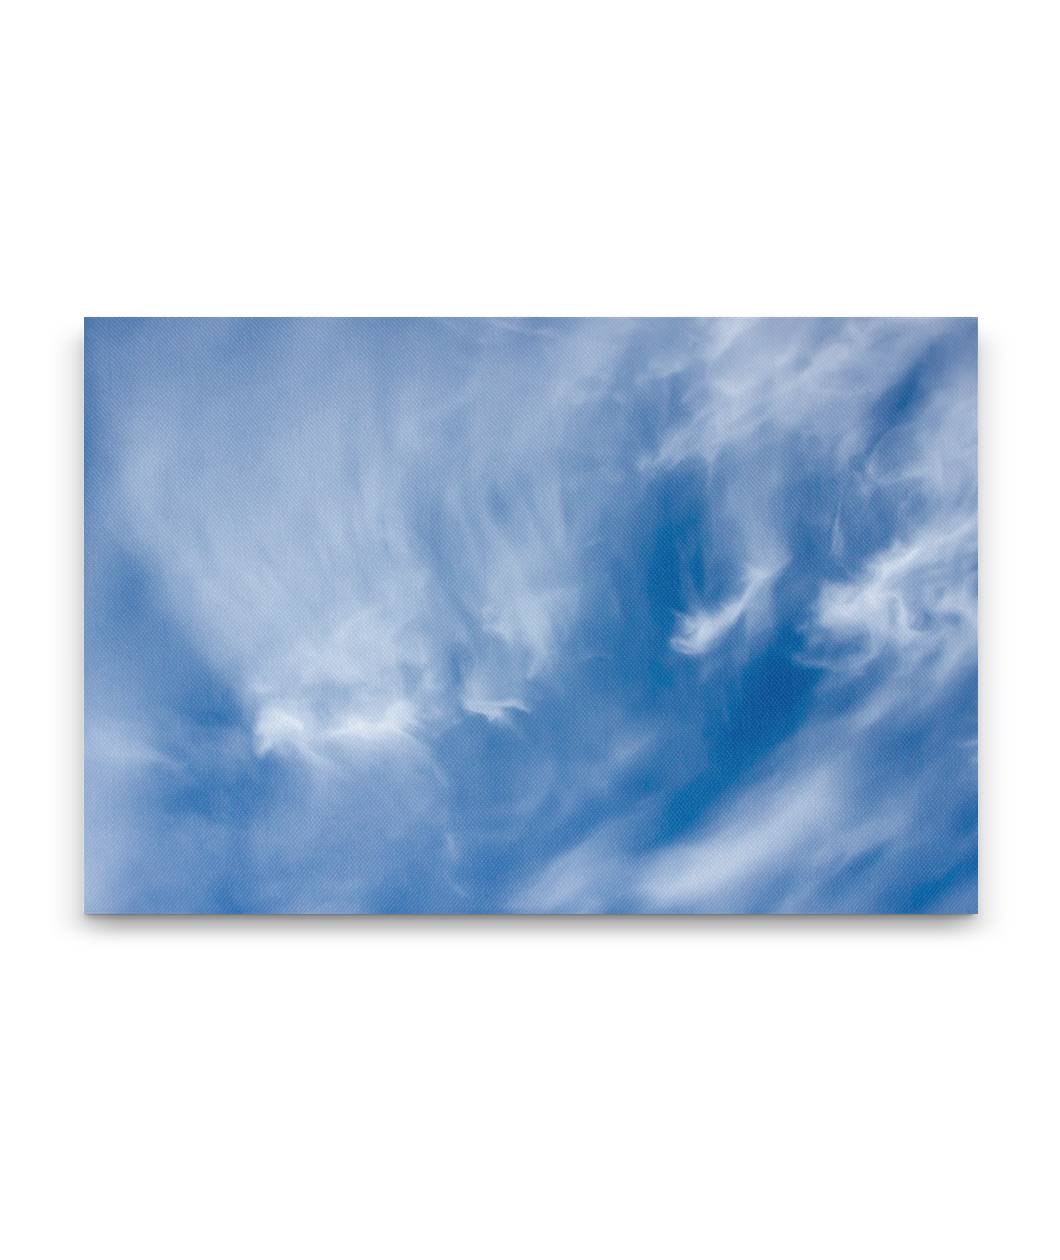 Cirrus Clouds and Blue Sky, Willamette National Forest, Oregon